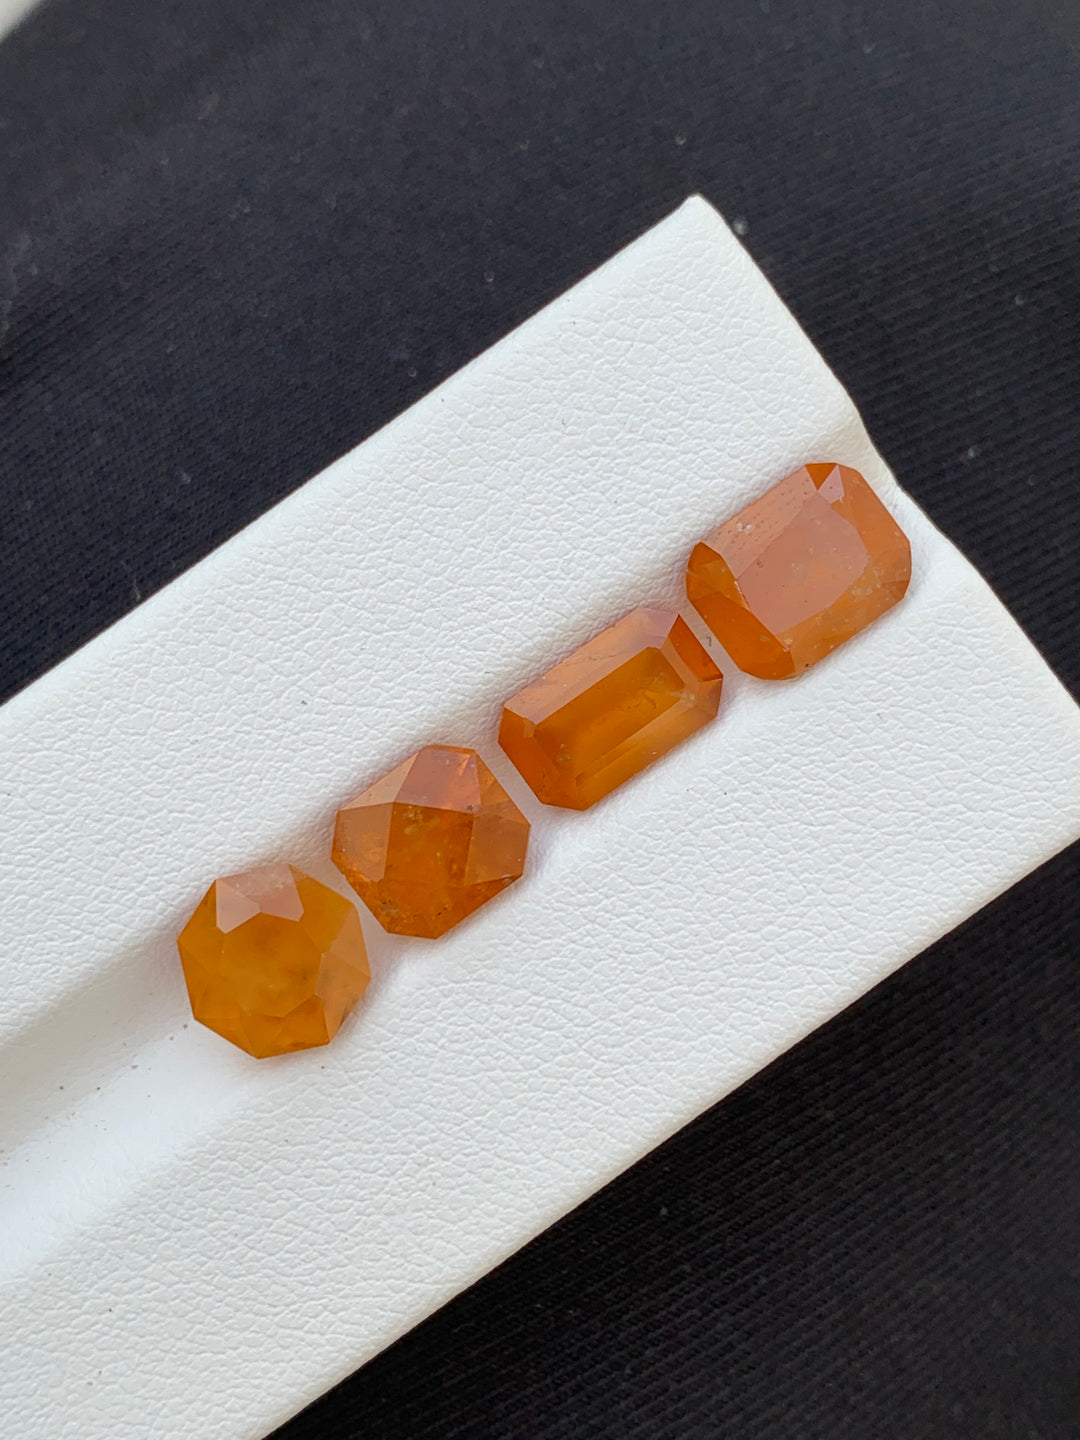 12.40 Carats Faceted Hessonite Garnet Lot For Jewelry